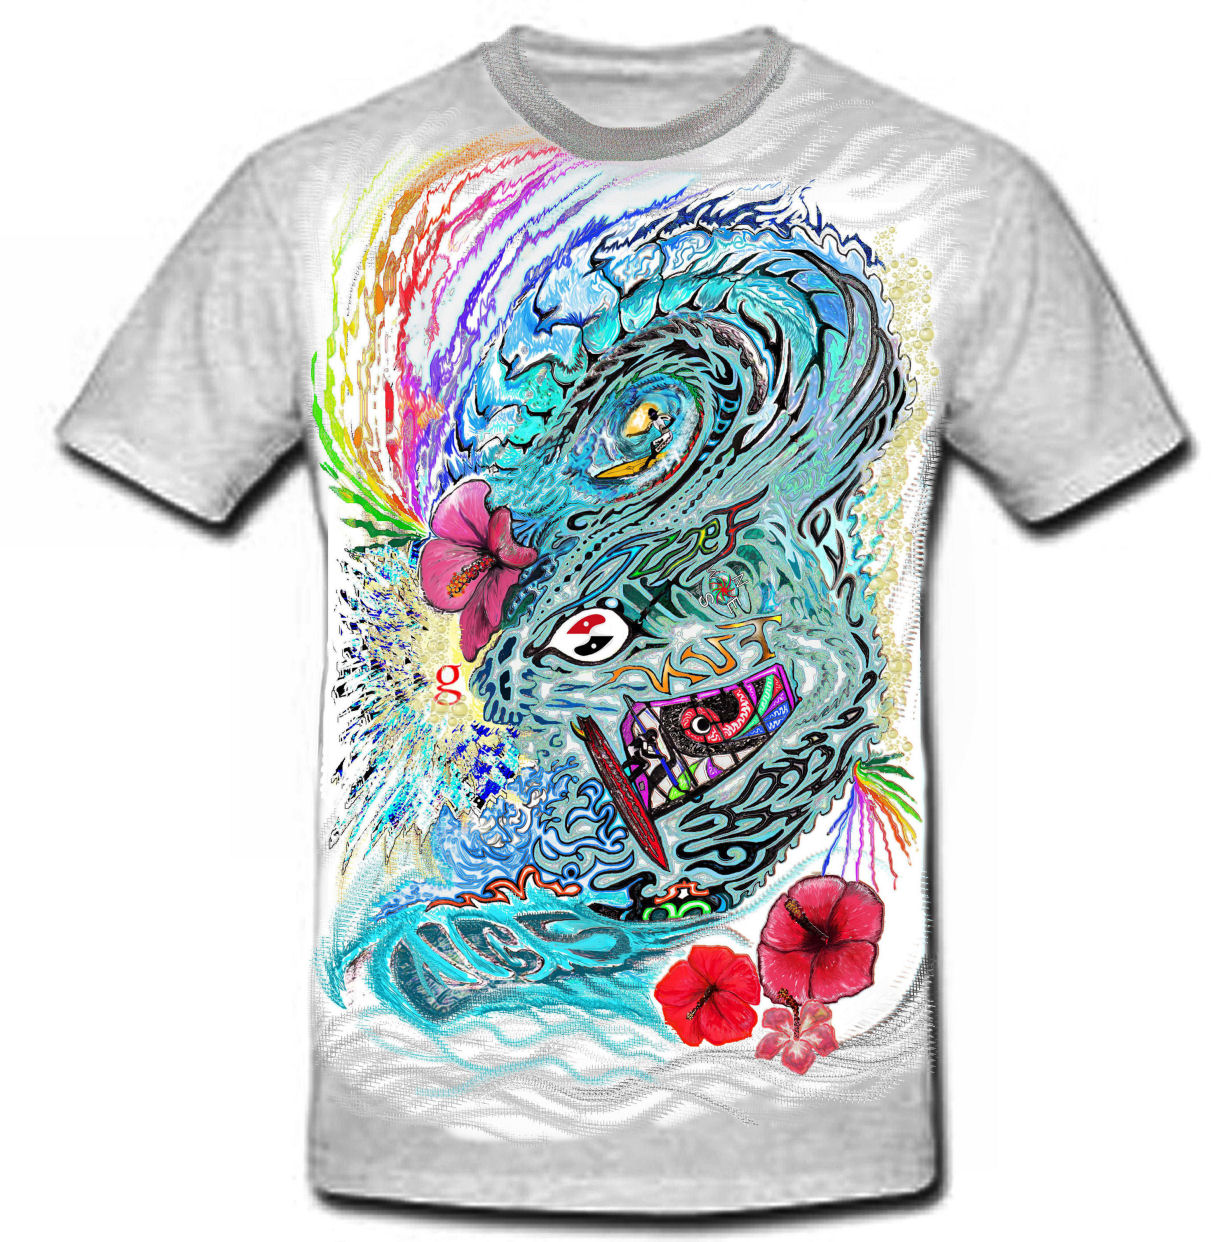 New entries for the t-shirt design comp